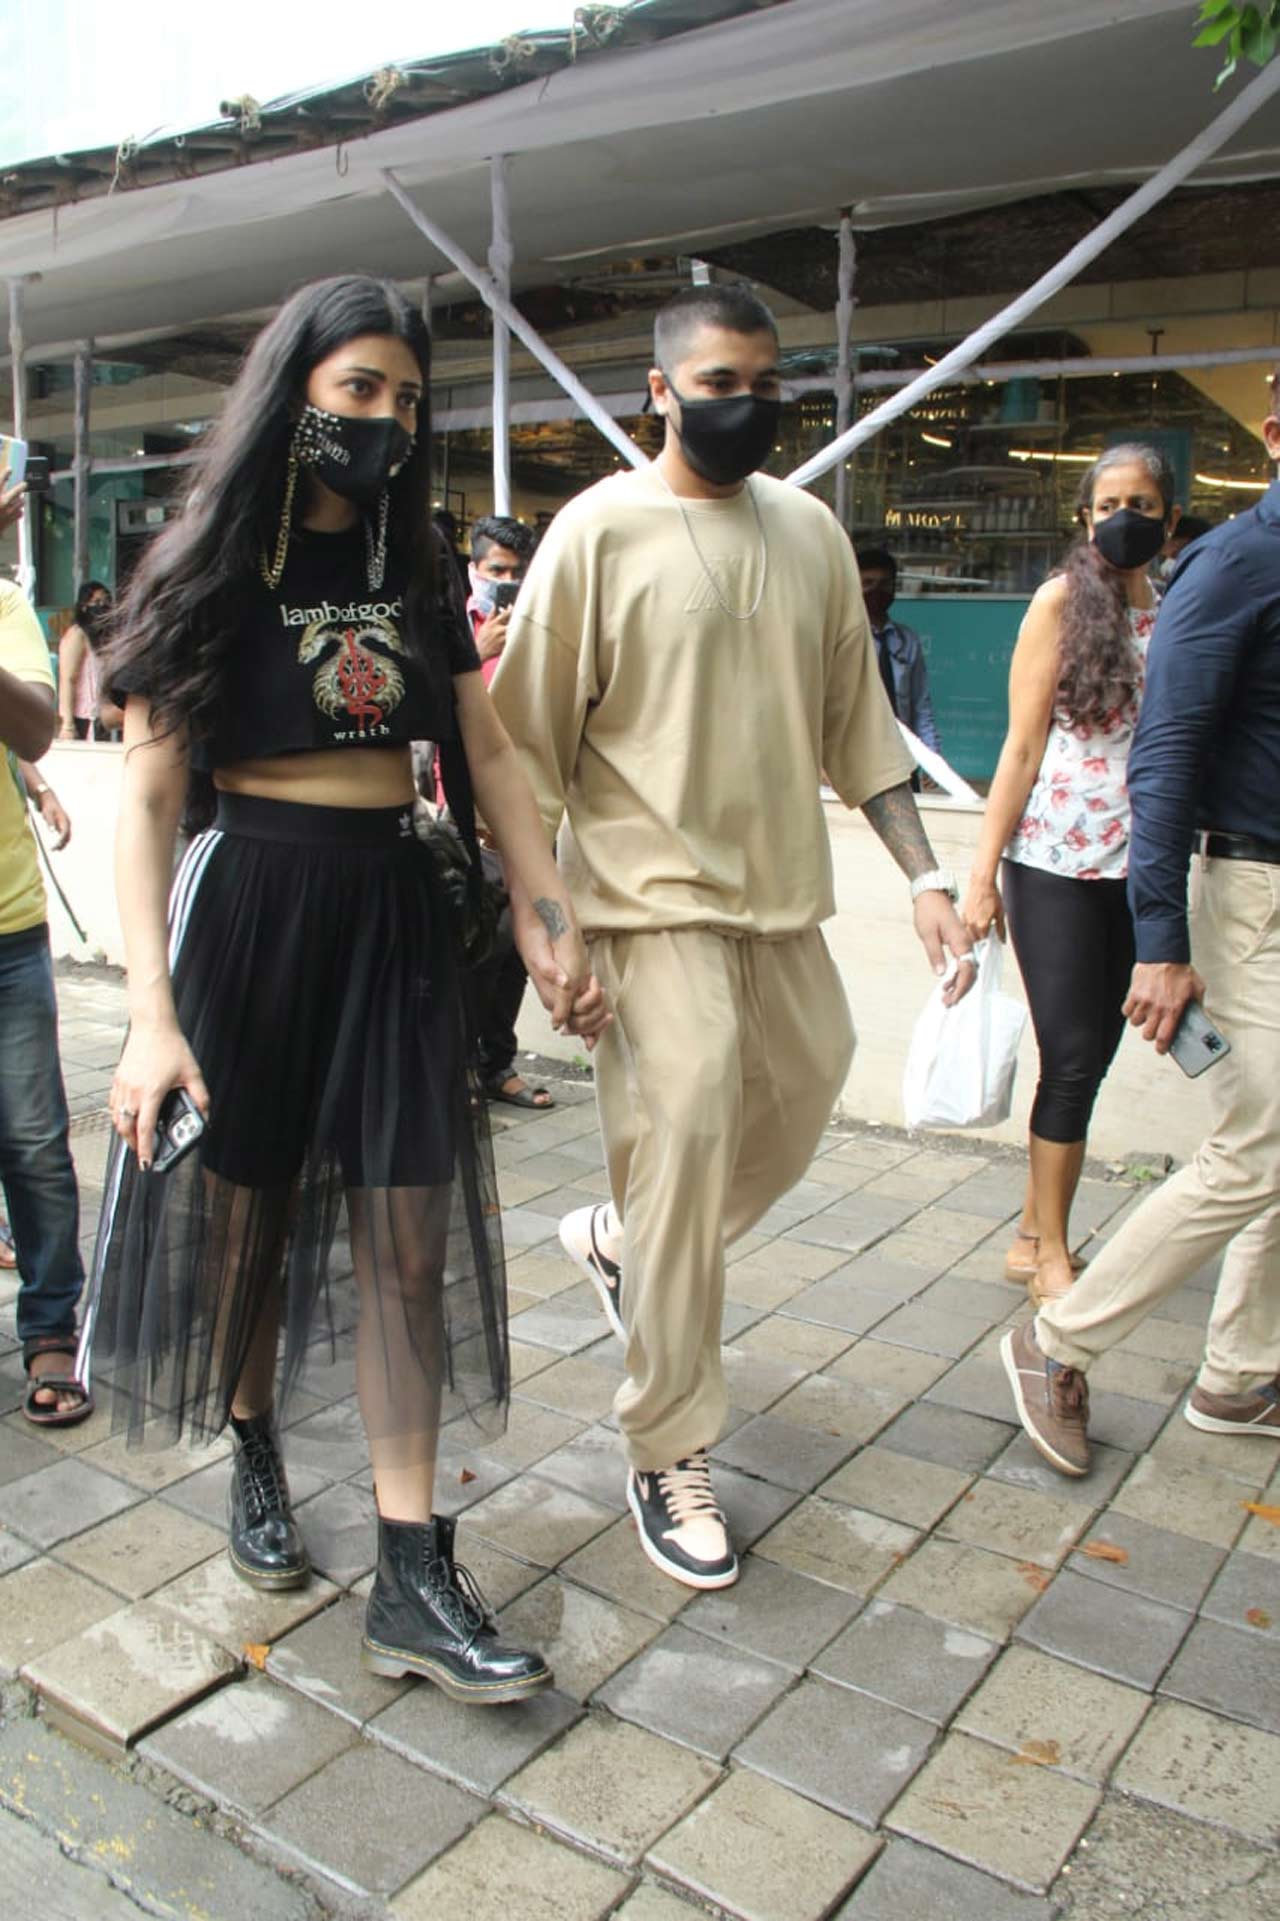 Shruti Haasan stepped out with her friend to run some errands at a food mall in Bandra, Mumbai.